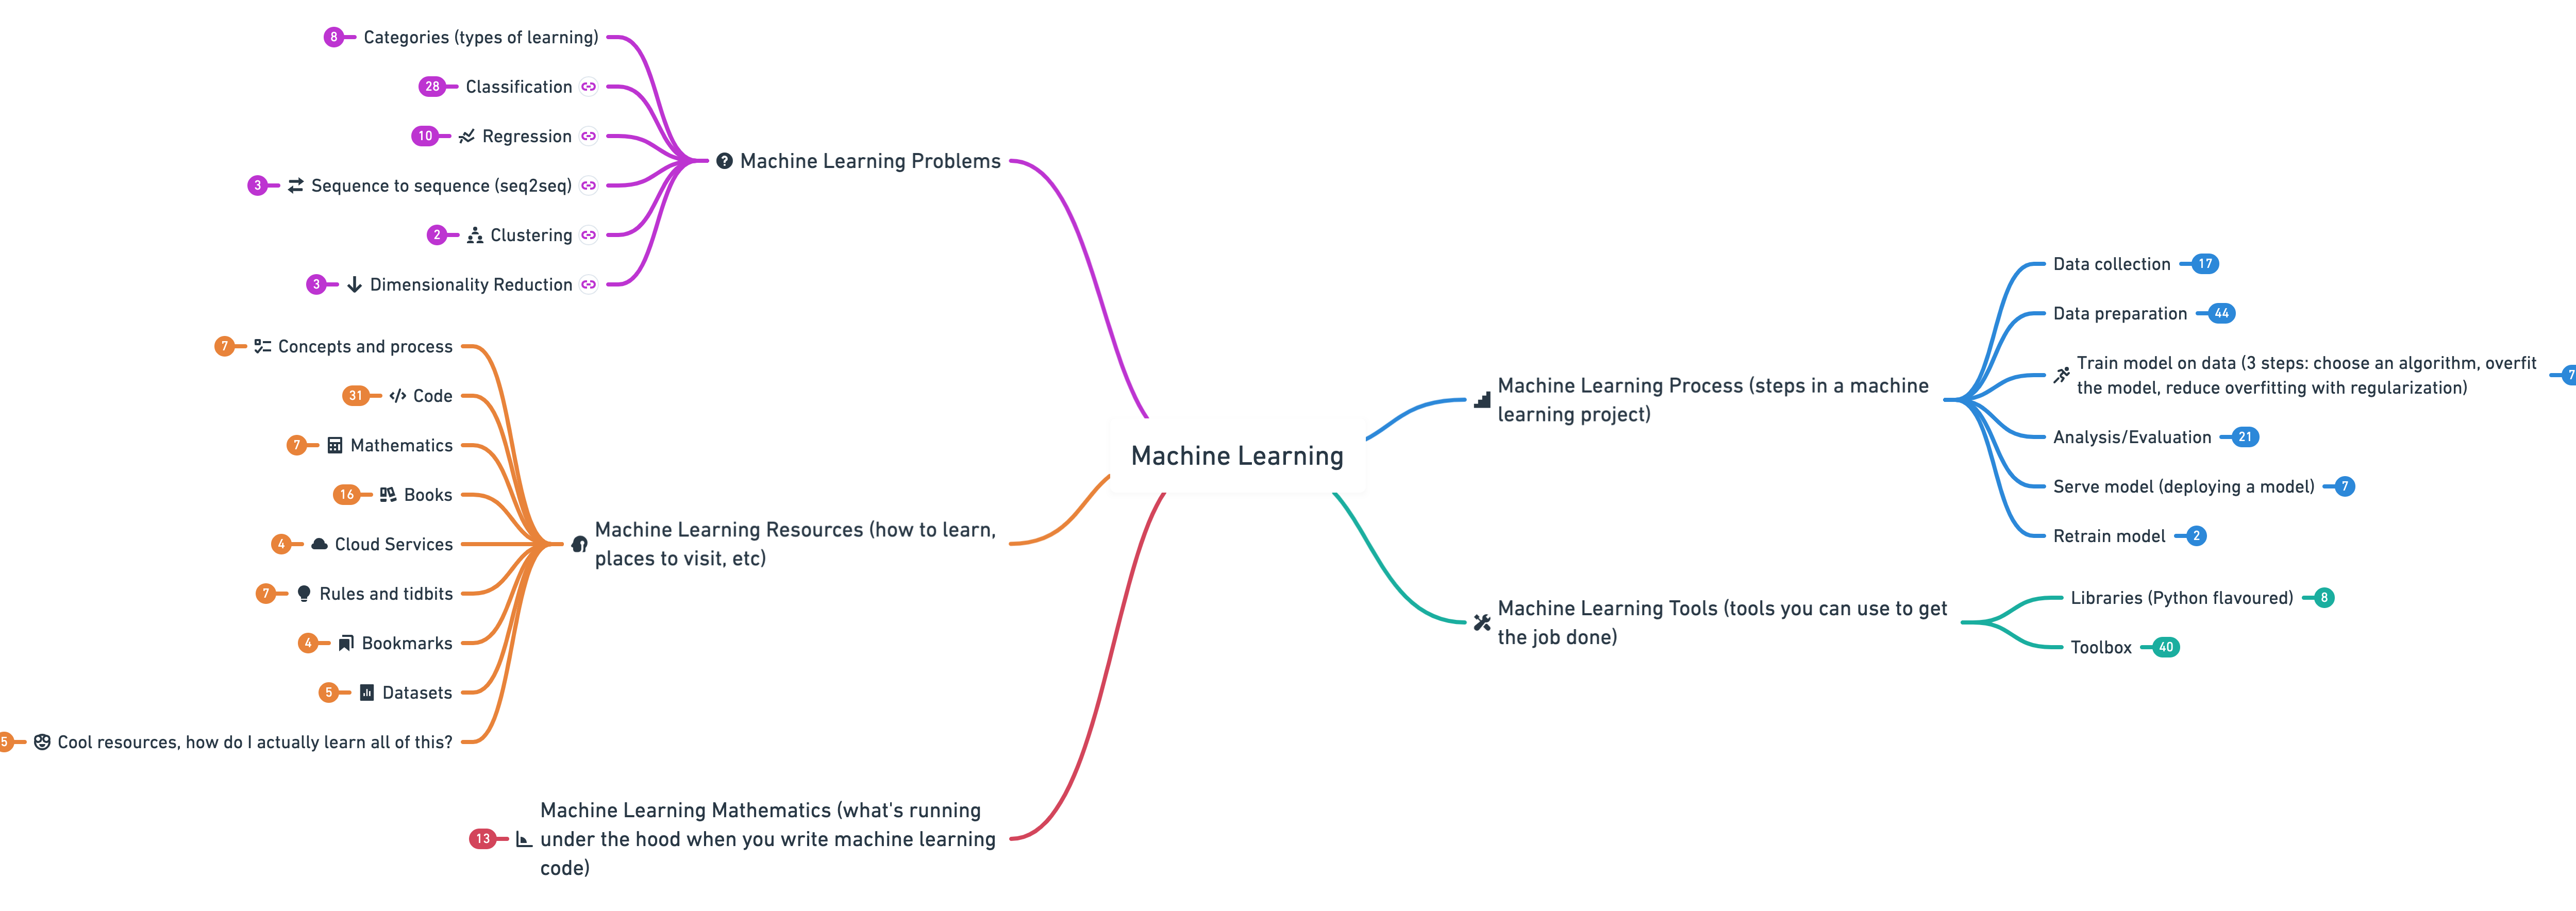 2020 machine learning roadmap overview